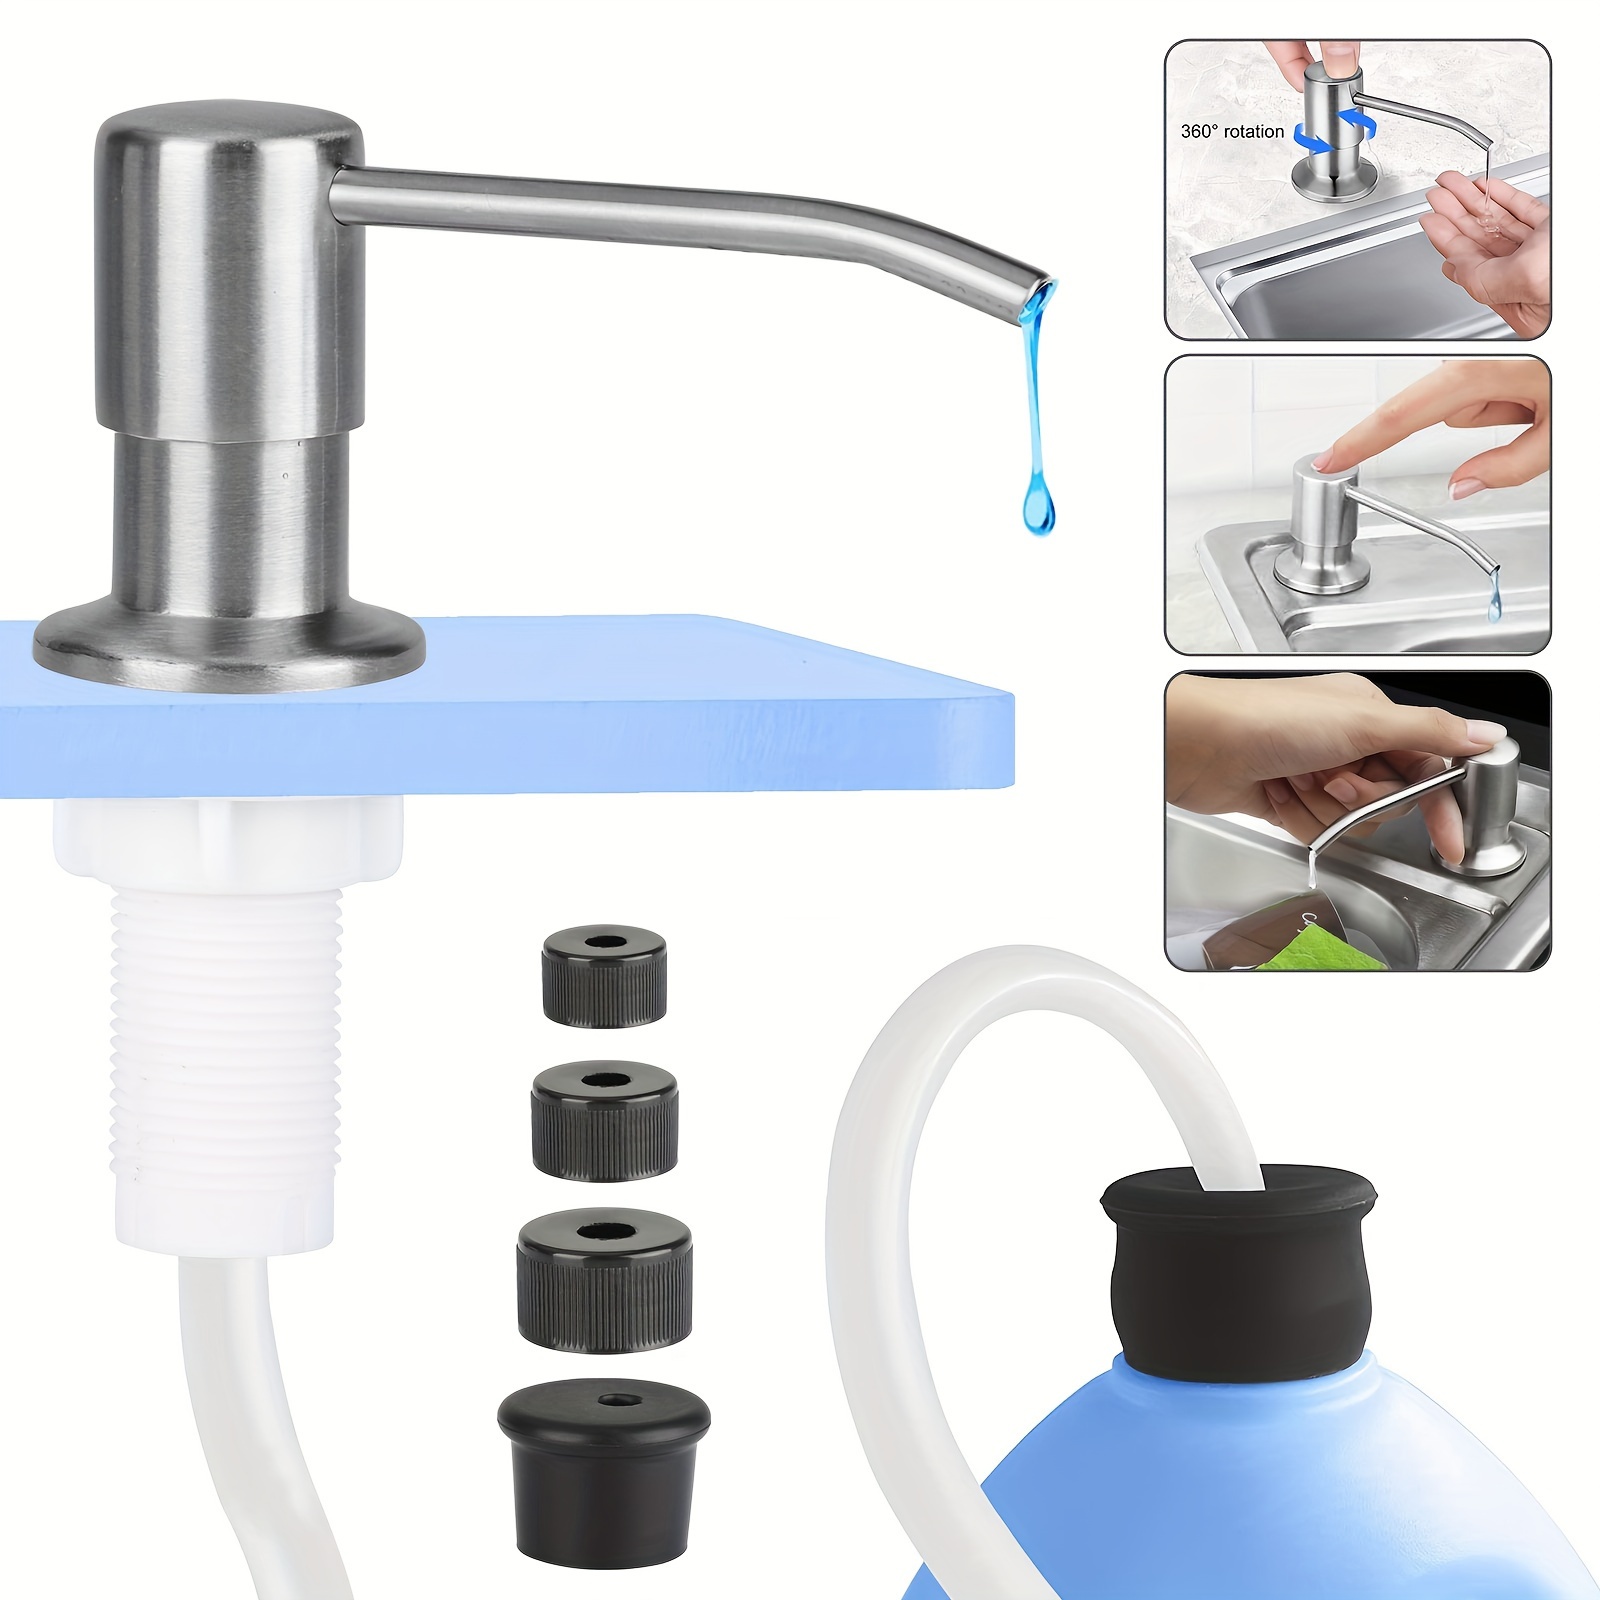 

1 Set Stainless Steel Soap Dispenser, Kitchen Bathroom Sink Liquid Pump, With 47"extension Tube Hose Accessories